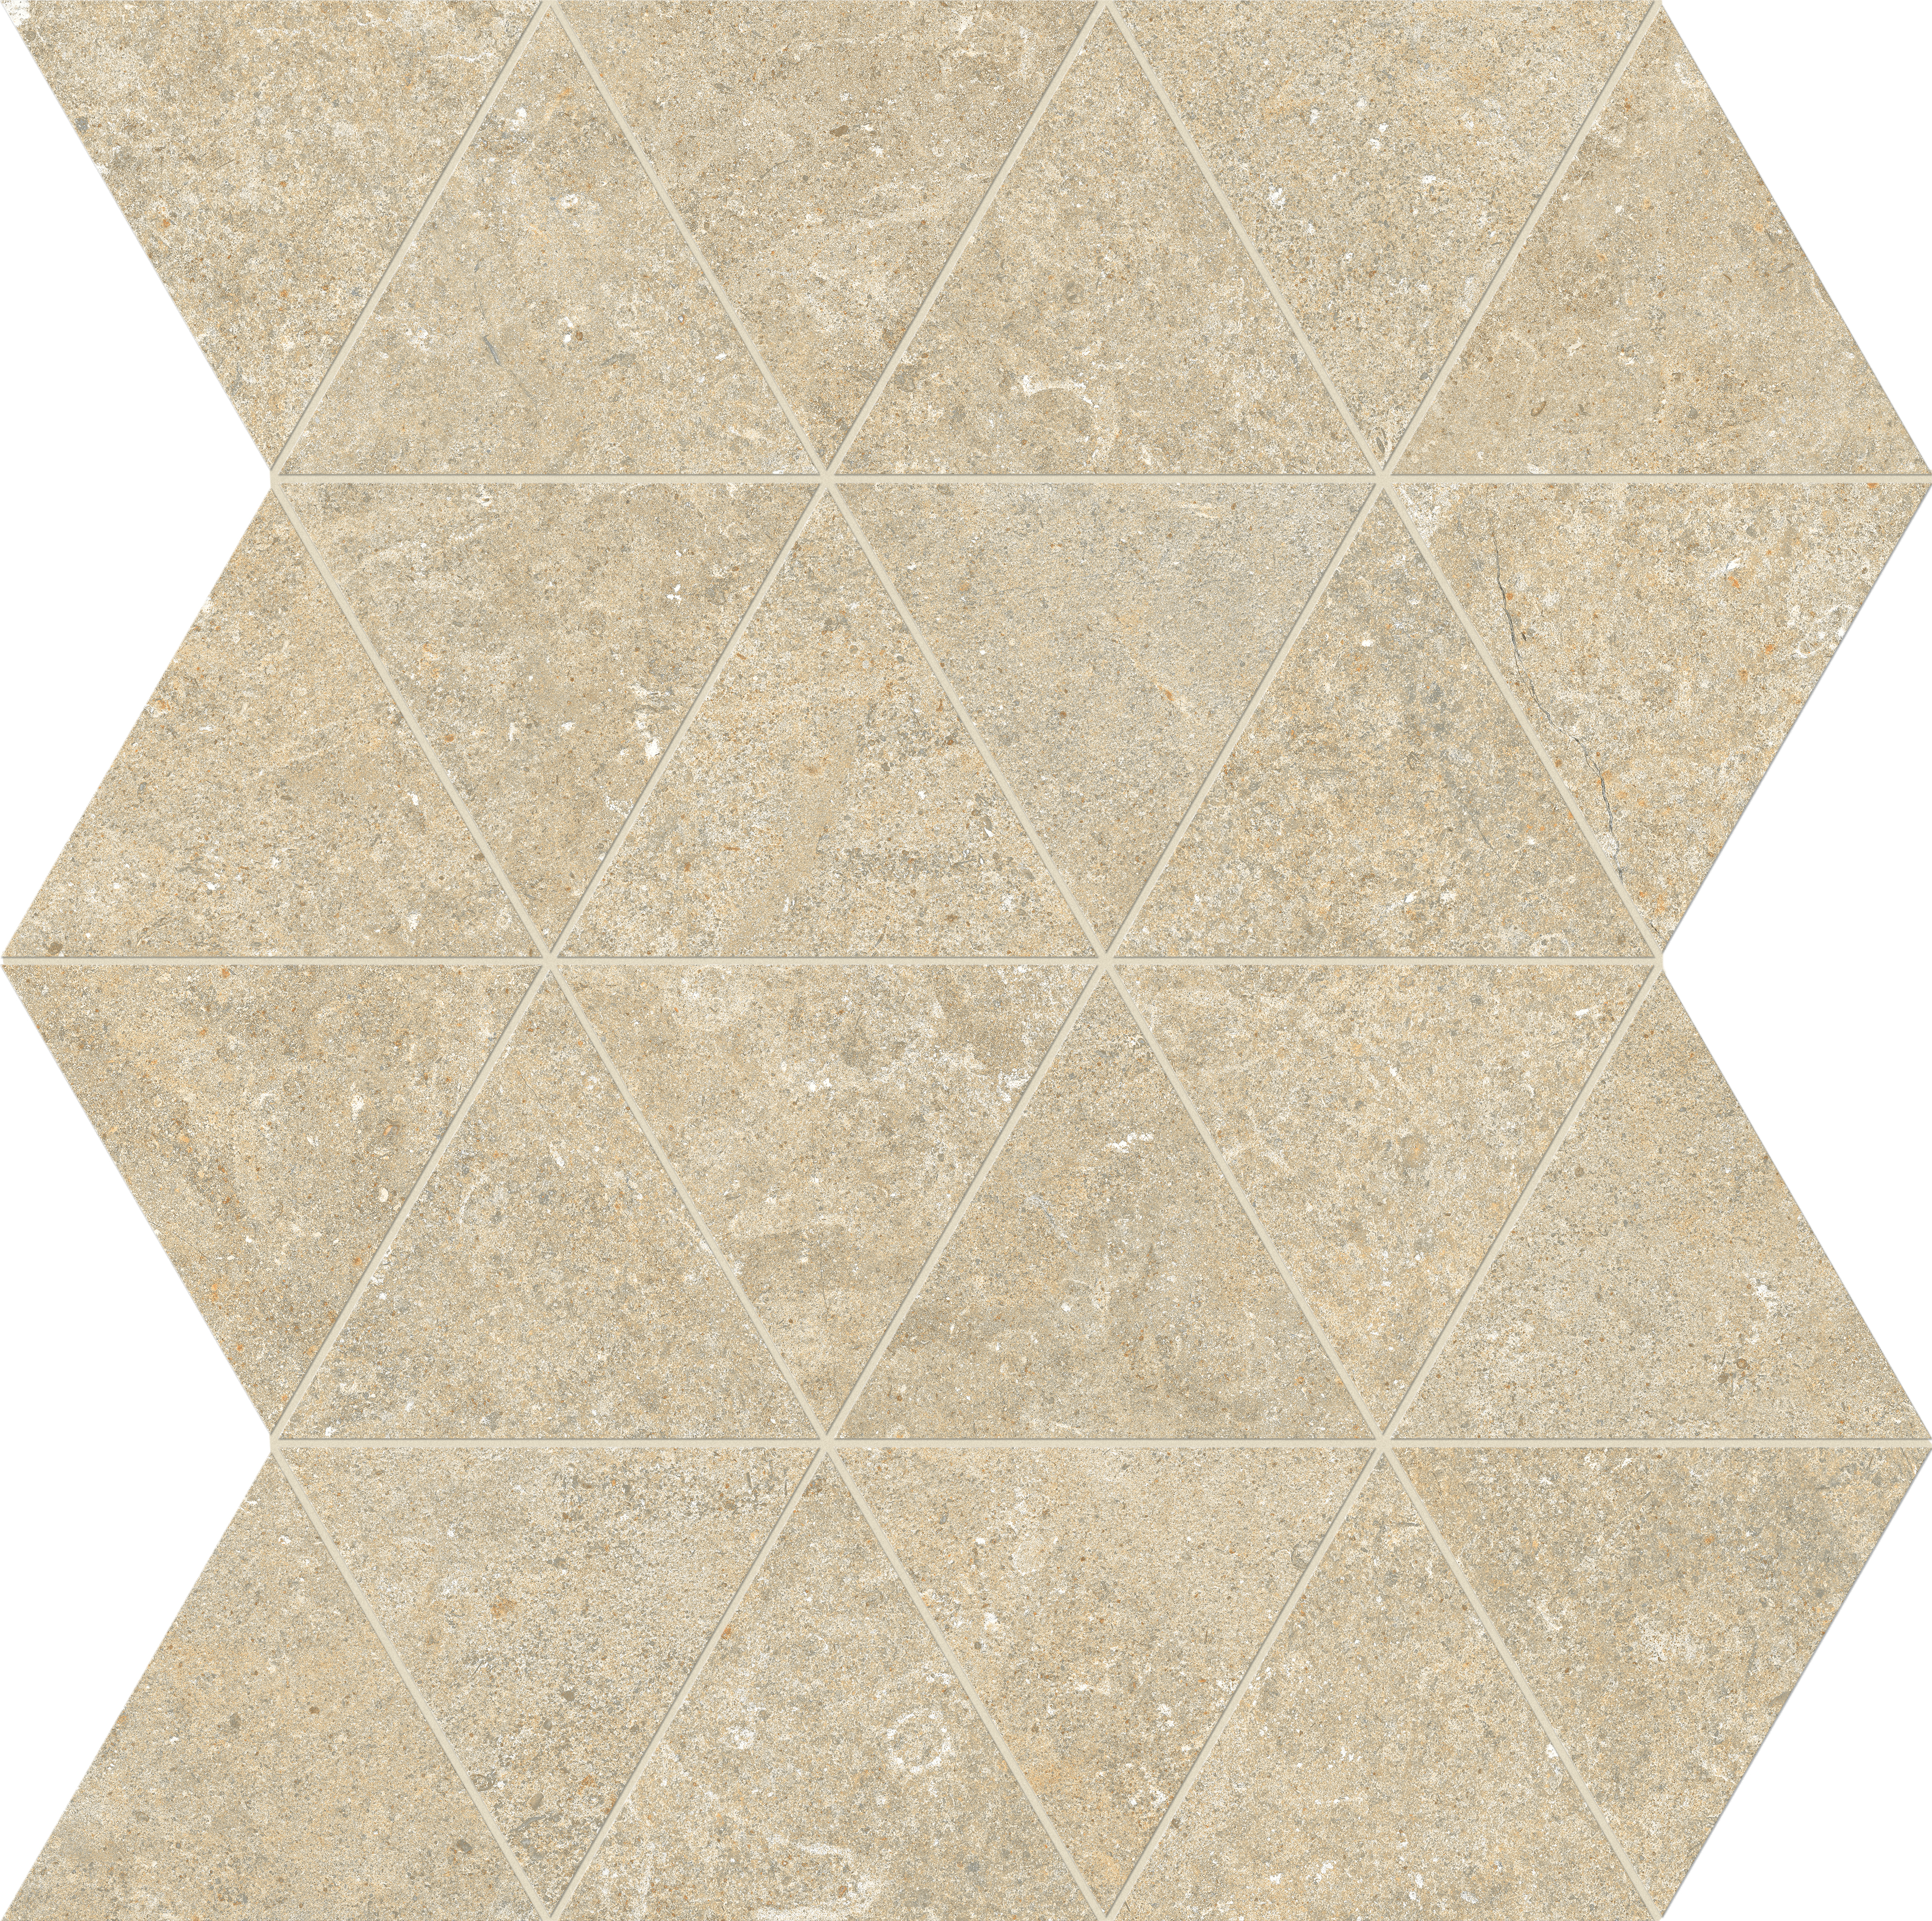 Marca Corona Arkistyle Sand Strutturato Hithick Fractal Tesserre J293 strutturato hithick 29x33,5cm rectified 9mm